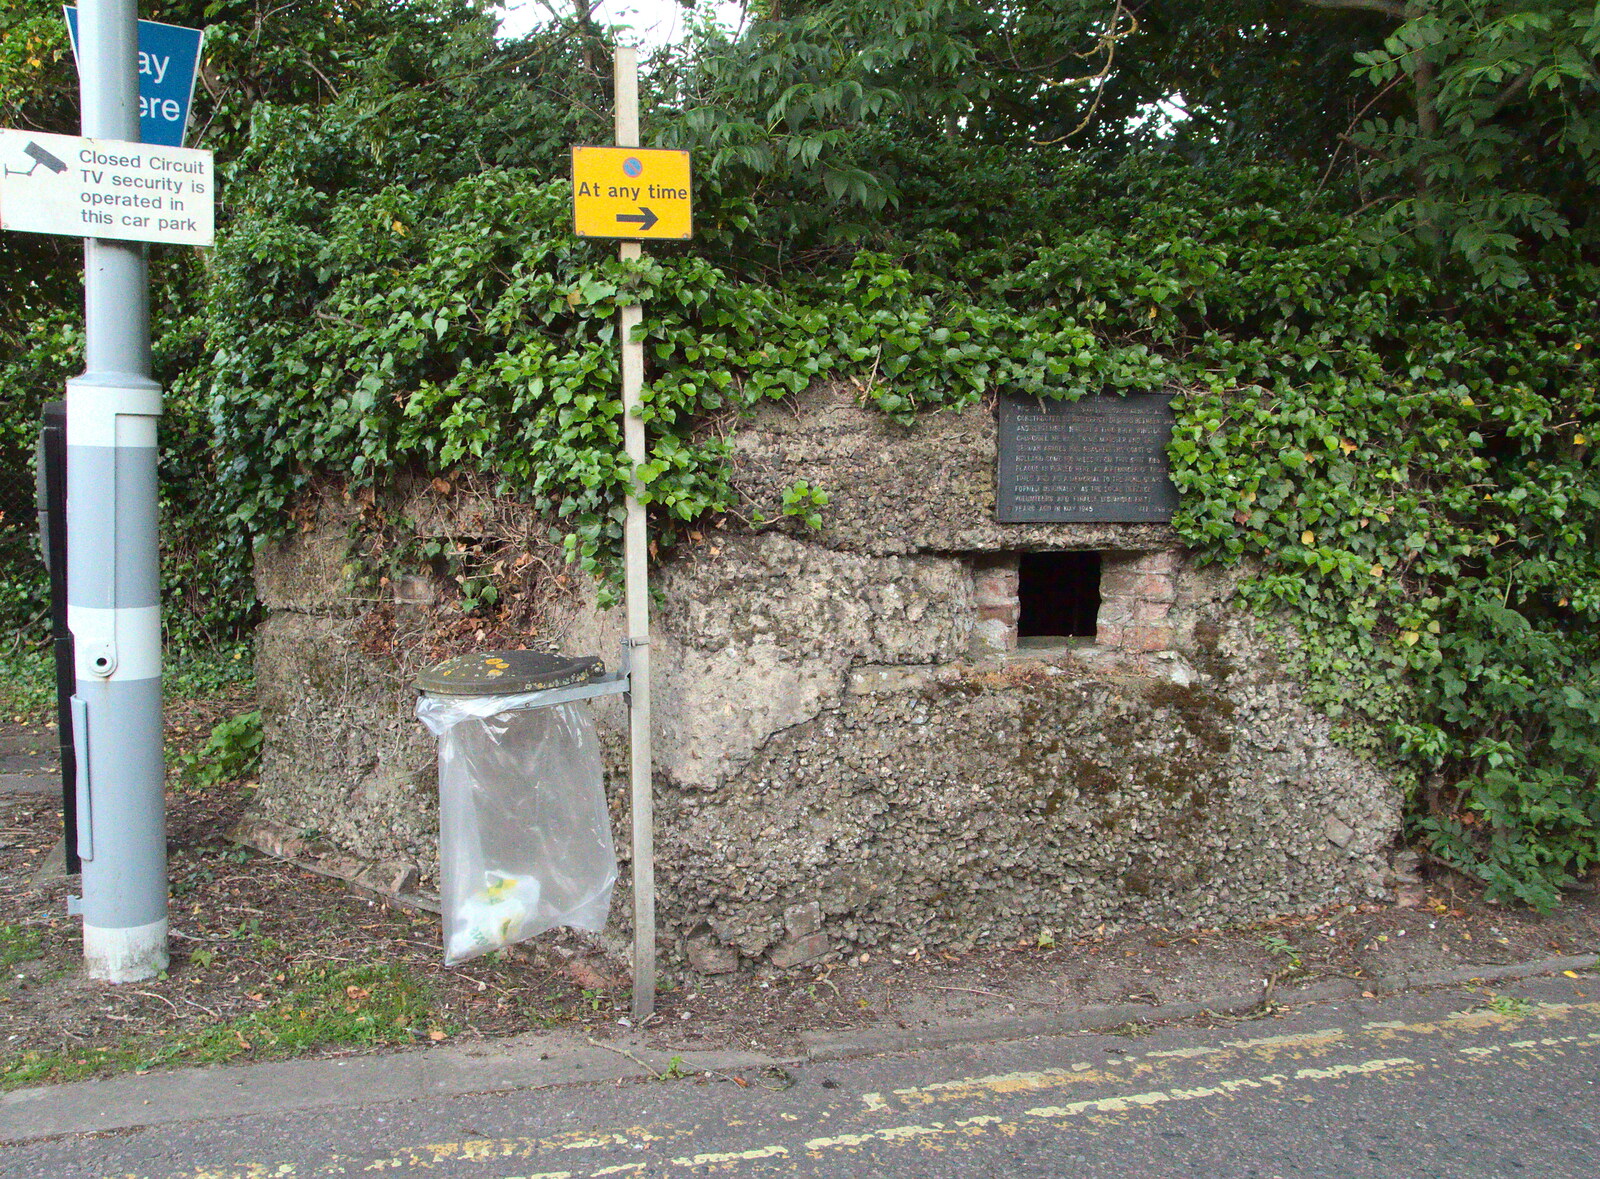 The almost-hidden pill box by the station from SwiftKey Does AirSoft, Epsom, Surrey - 11th June 2015